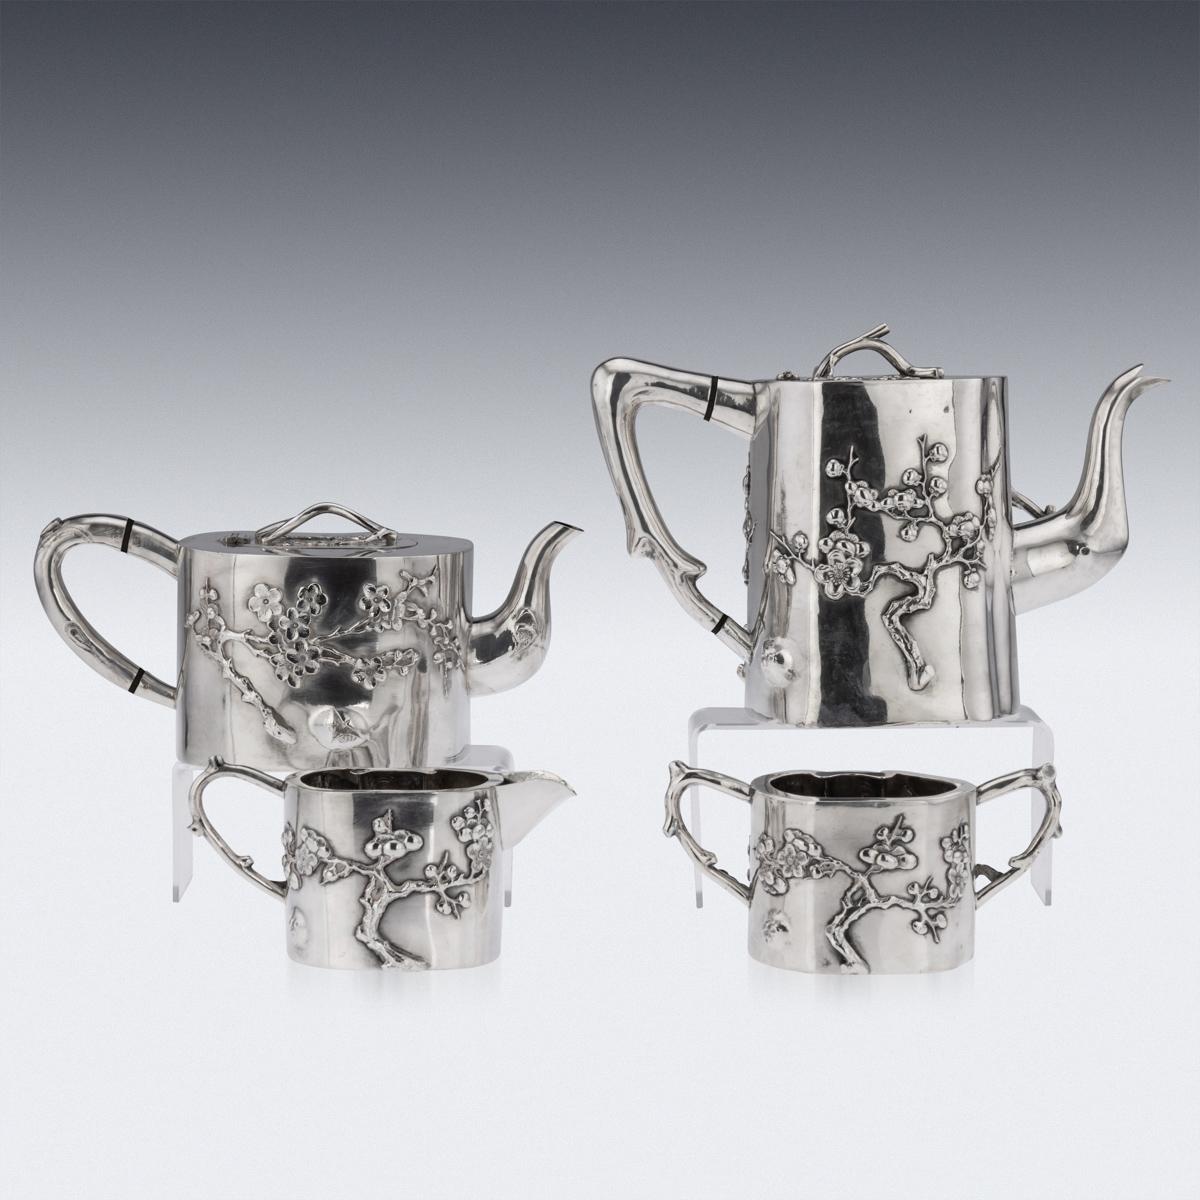 20th Century Chinese Export Solid Silver Four Piece Tea Set, Singfat, c.1900 In Good Condition For Sale In Royal Tunbridge Wells, Kent